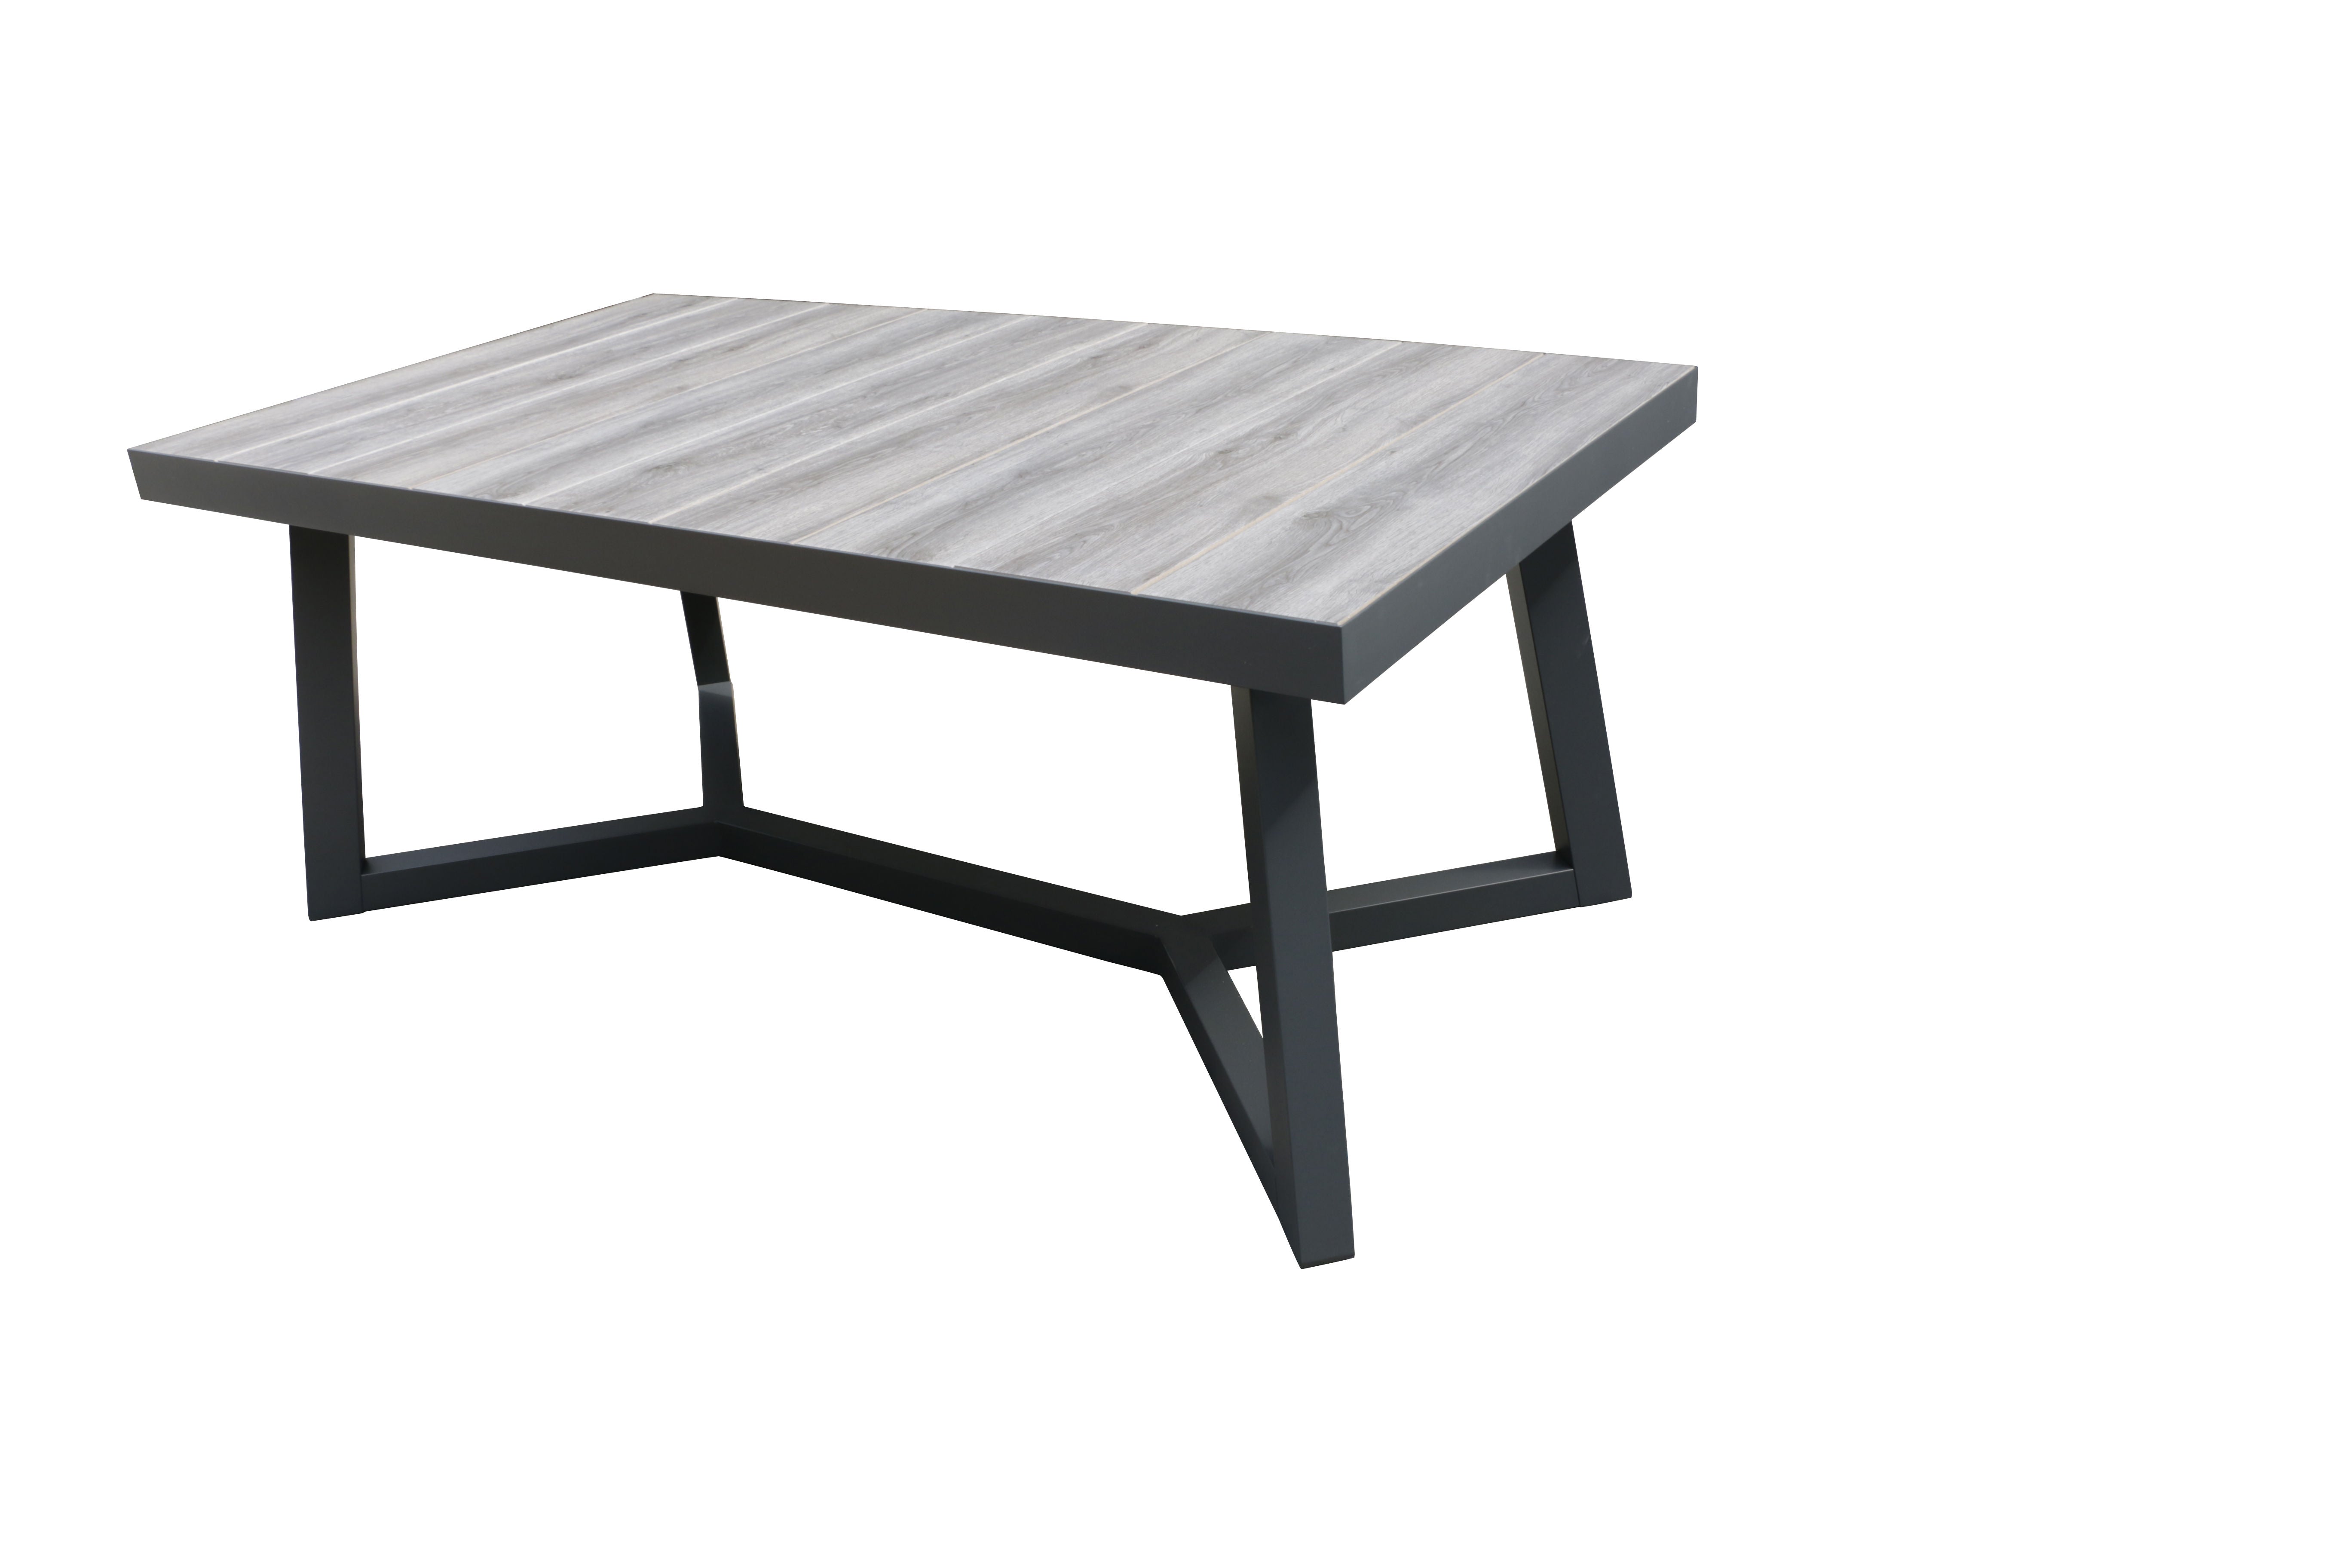 MOSS MOSS-6004 - Maroma Collection, Elegant table with charcoal "V" aluminum leg structure with wide mocha ceramic table top, 71" x 36" x H 29.5"